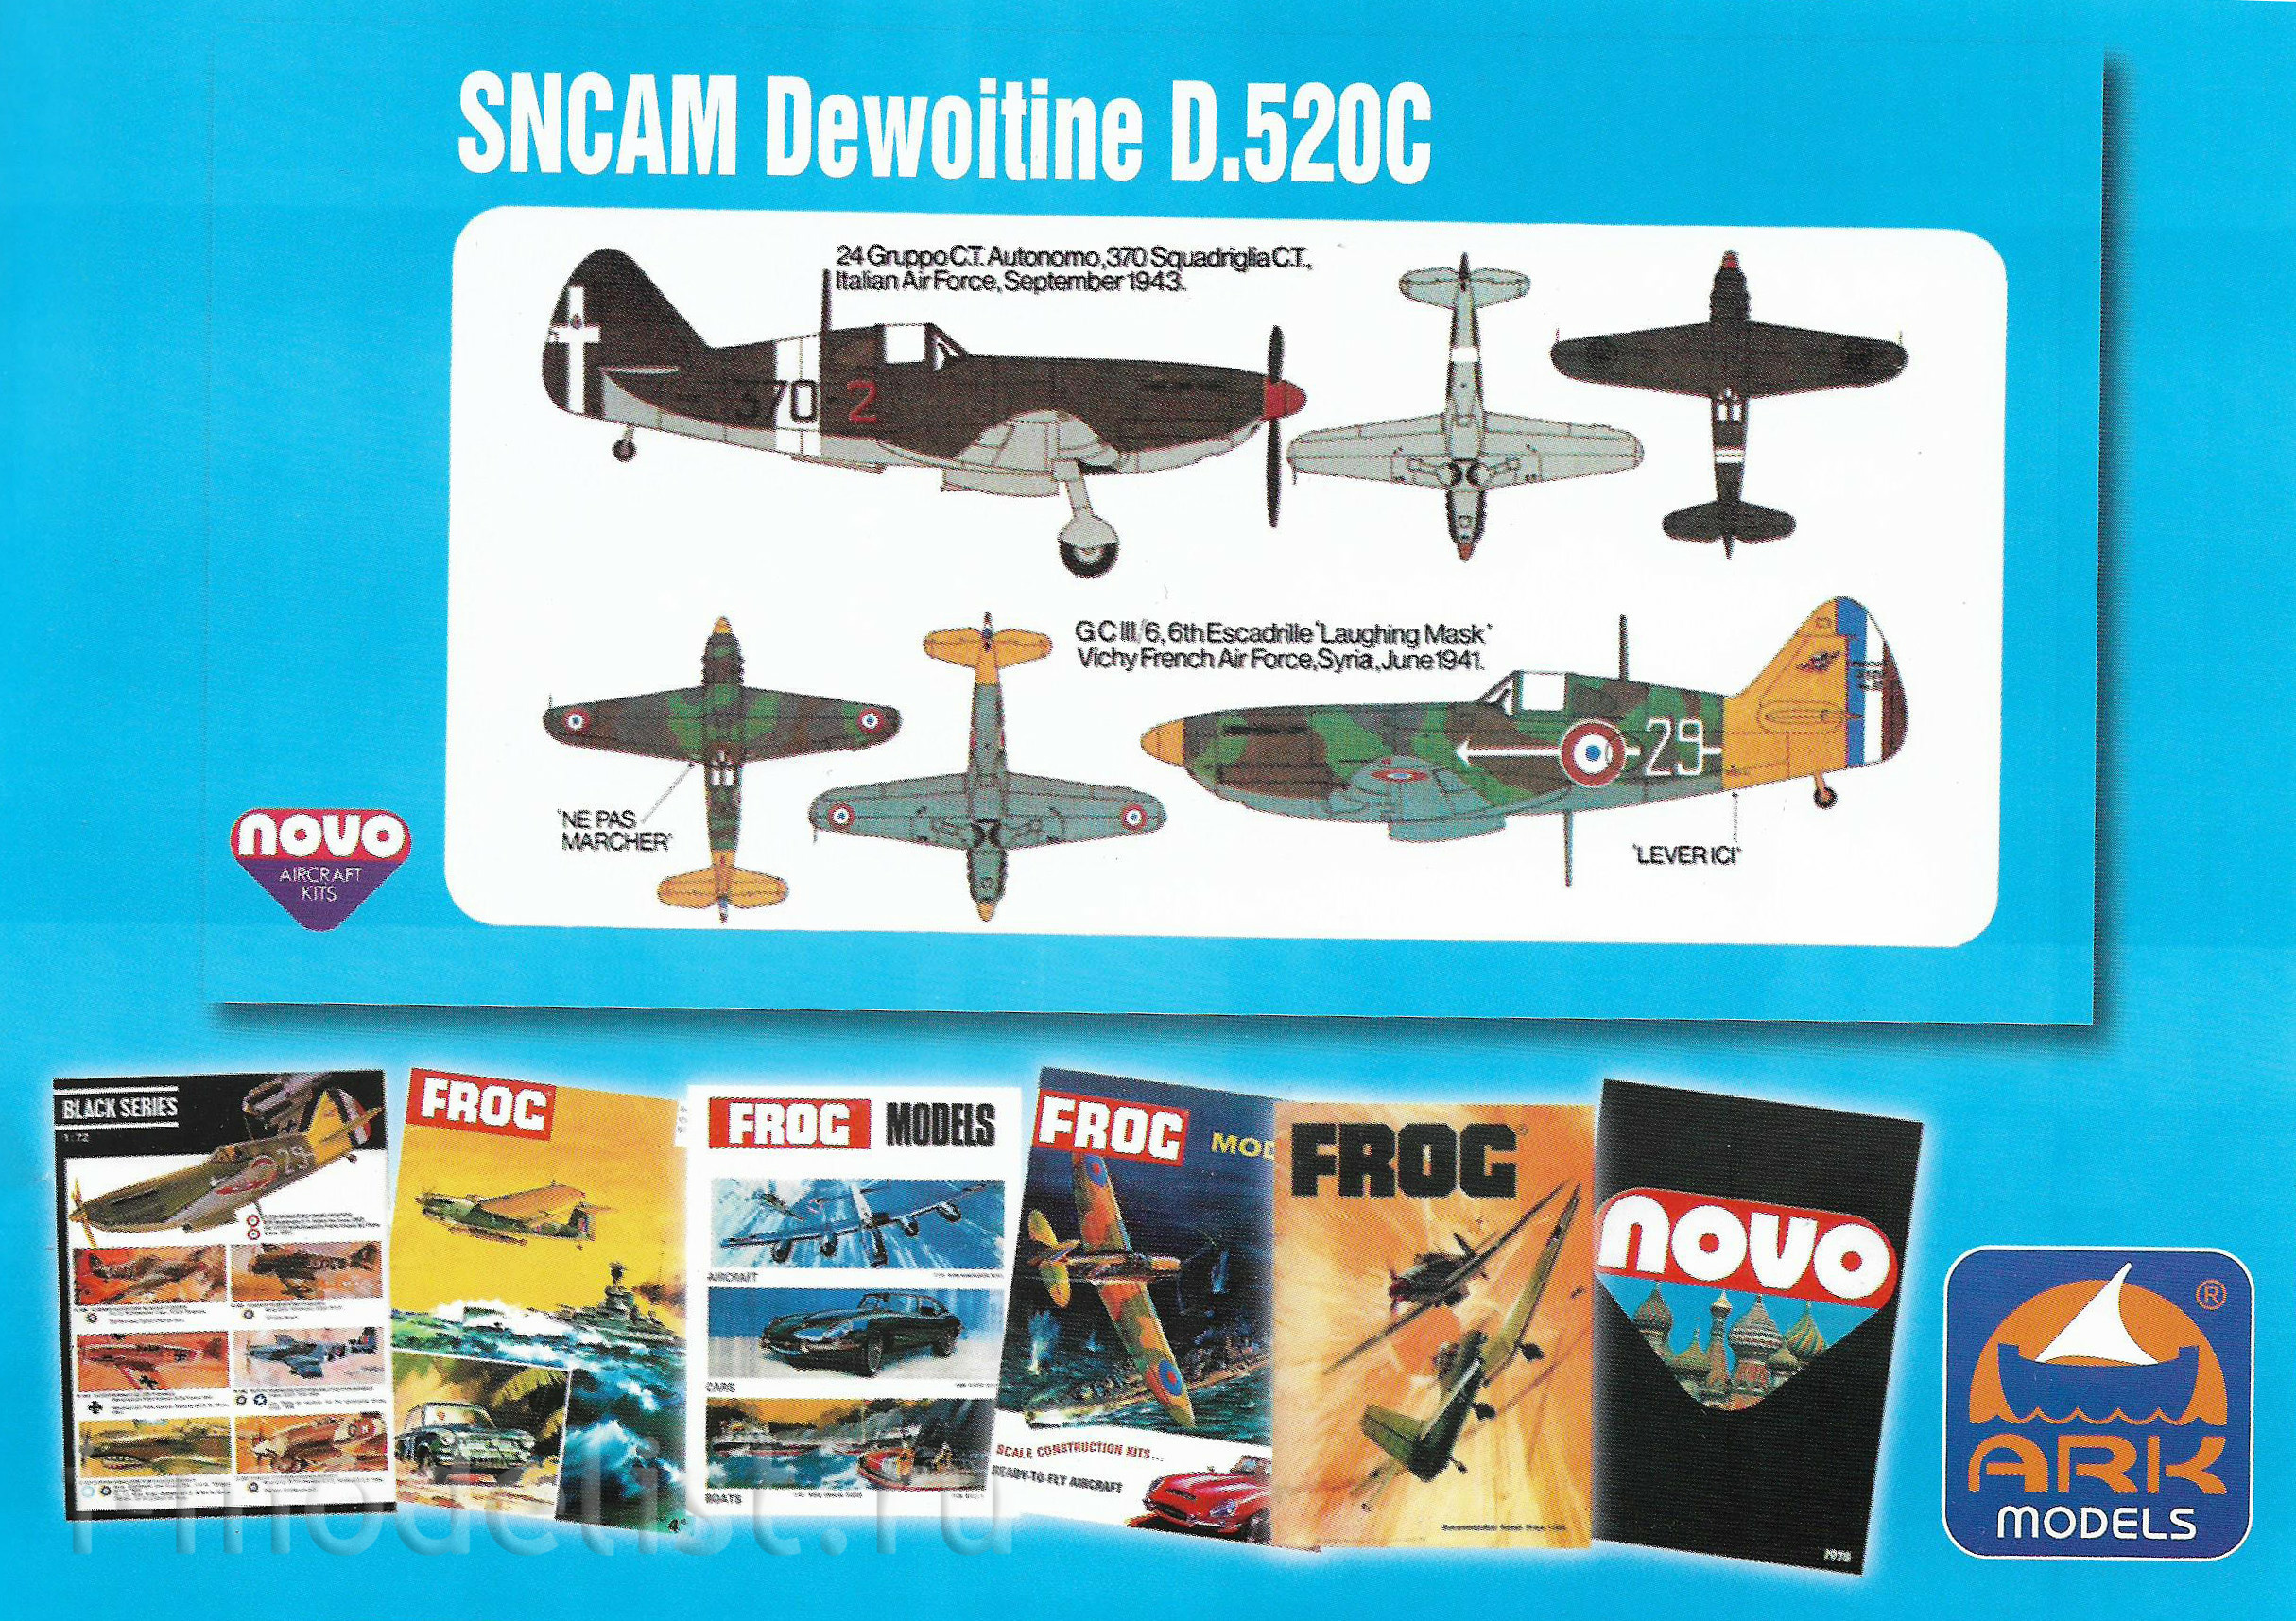 72016 ARK models 1/72 French fighter, the D. 520 Dewoitine